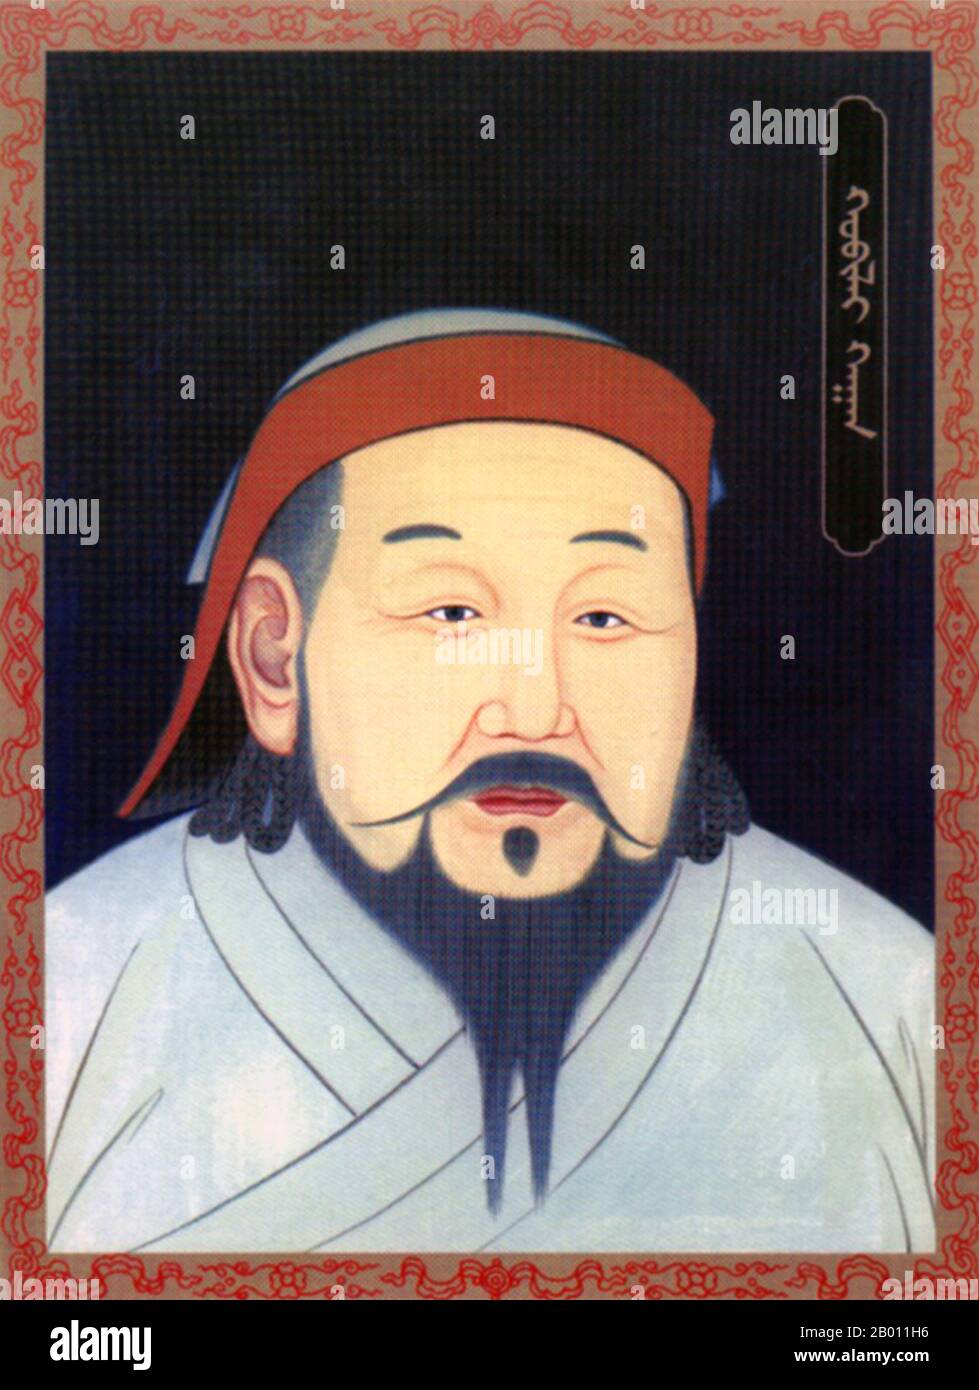 Mongolia/China: Kublai Khan (r.1260-1294), 5th Khagan of the Mongol Empire. Founder and First Yuan Emperor Shizu, 20th century.  Kublai (or Khubilai) Khan (pinyin: Hūbìliè, (September 23, 1215 – February 18, 1294) was the fifth Great Khan of the Mongol Empire from 1260 to 1294 and the founder of the Yuan Dynasty in East Asia. As the second son of Tolui and Sorghaghtani Beki and a grandson of Genghis Khan, he claimed the title of Khagan of the Ikh Mongol Uls (Mongol Empire). Stock Photo